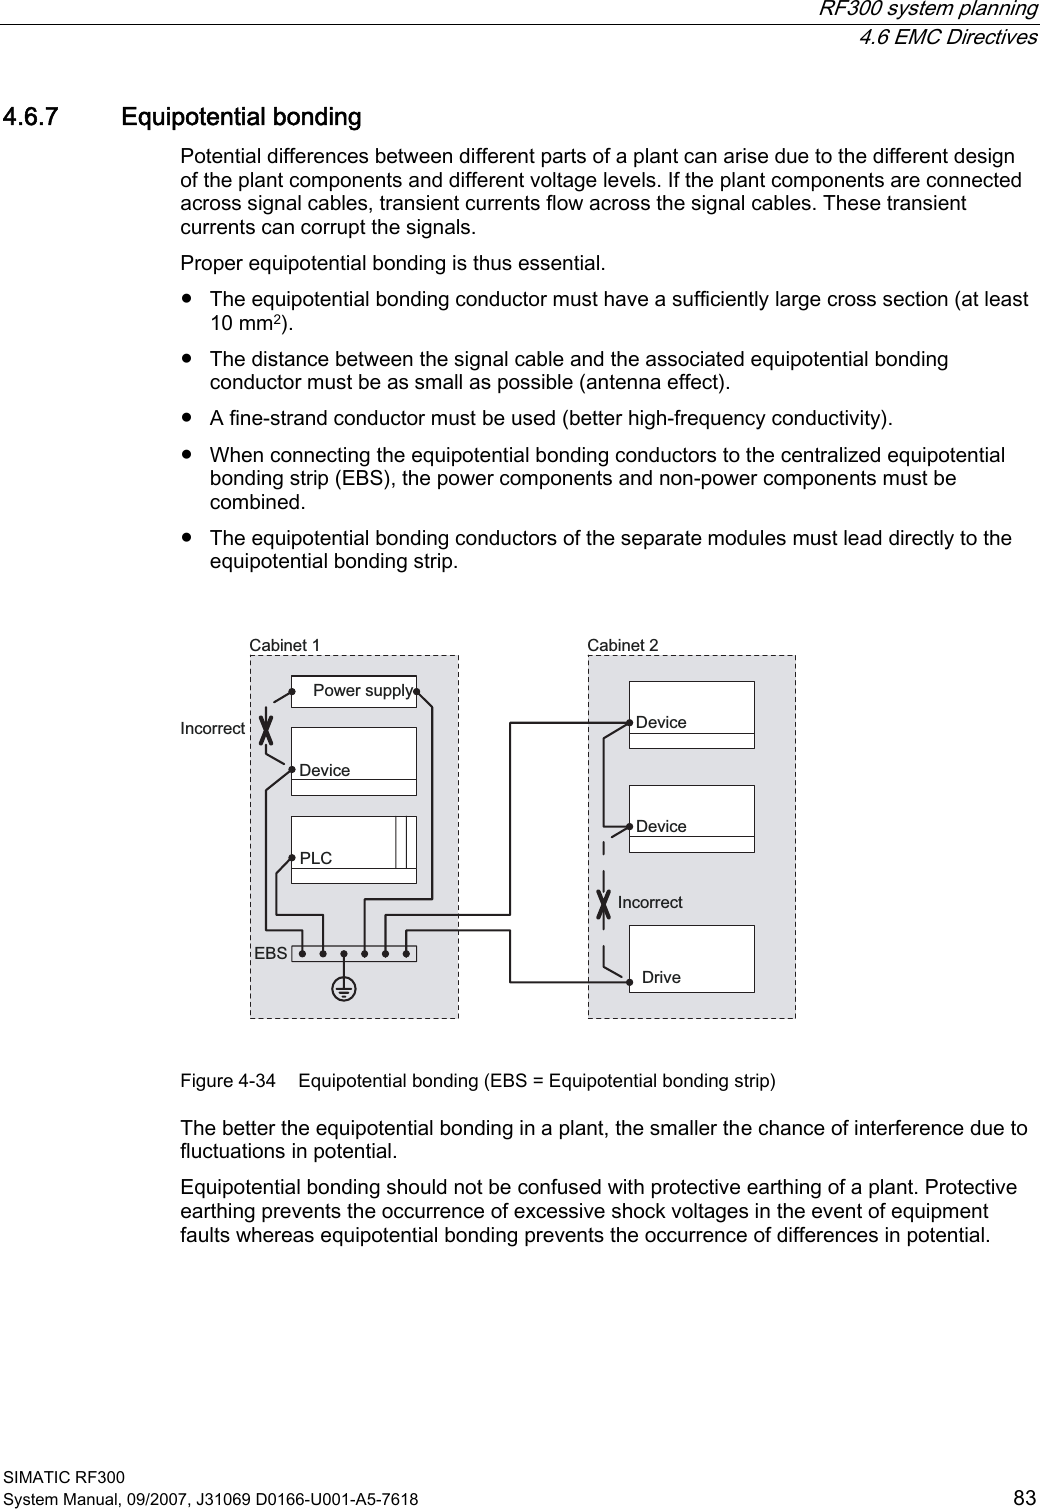  RF300 system planning  4.6 EMC Directives SIMATIC RF300 System Manual, 09/2007, J31069 D0166-U001-A5-7618  83 4.6.7 Equipotential bonding Potential differences between different parts of a plant can arise due to the different design of the plant components and different voltage levels. If the plant components are connected across signal cables, transient currents flow across the signal cables. These transient currents can corrupt the signals. Proper equipotential bonding is thus essential.  ●  The equipotential bonding conductor must have a sufficiently large cross section (at least 10 mm2). ●  The distance between the signal cable and the associated equipotential bonding conductor must be as small as possible (antenna effect). ●  A fine-strand conductor must be used (better high-frequency conductivity). ●  When connecting the equipotential bonding conductors to the centralized equipotential bonding strip (EBS), the power components and non-power components must be combined. ●  The equipotential bonding conductors of the separate modules must lead directly to the equipotential bonding strip.  &amp;DELQHW &amp;DELQHW,QFRUUHFW3RZHUVXSSO\&apos;ULYH&apos;HYLFH3/&amp;(%6&apos;HYLFH&apos;HYLFH,QFRUUHFW Figure 4-34  Equipotential bonding (EBS = Equipotential bonding strip) The better the equipotential bonding in a plant, the smaller the chance of interference due to fluctuations in potential. Equipotential bonding should not be confused with protective earthing of a plant. Protective earthing prevents the occurrence of excessive shock voltages in the event of equipment faults whereas equipotential bonding prevents the occurrence of differences in potential. 